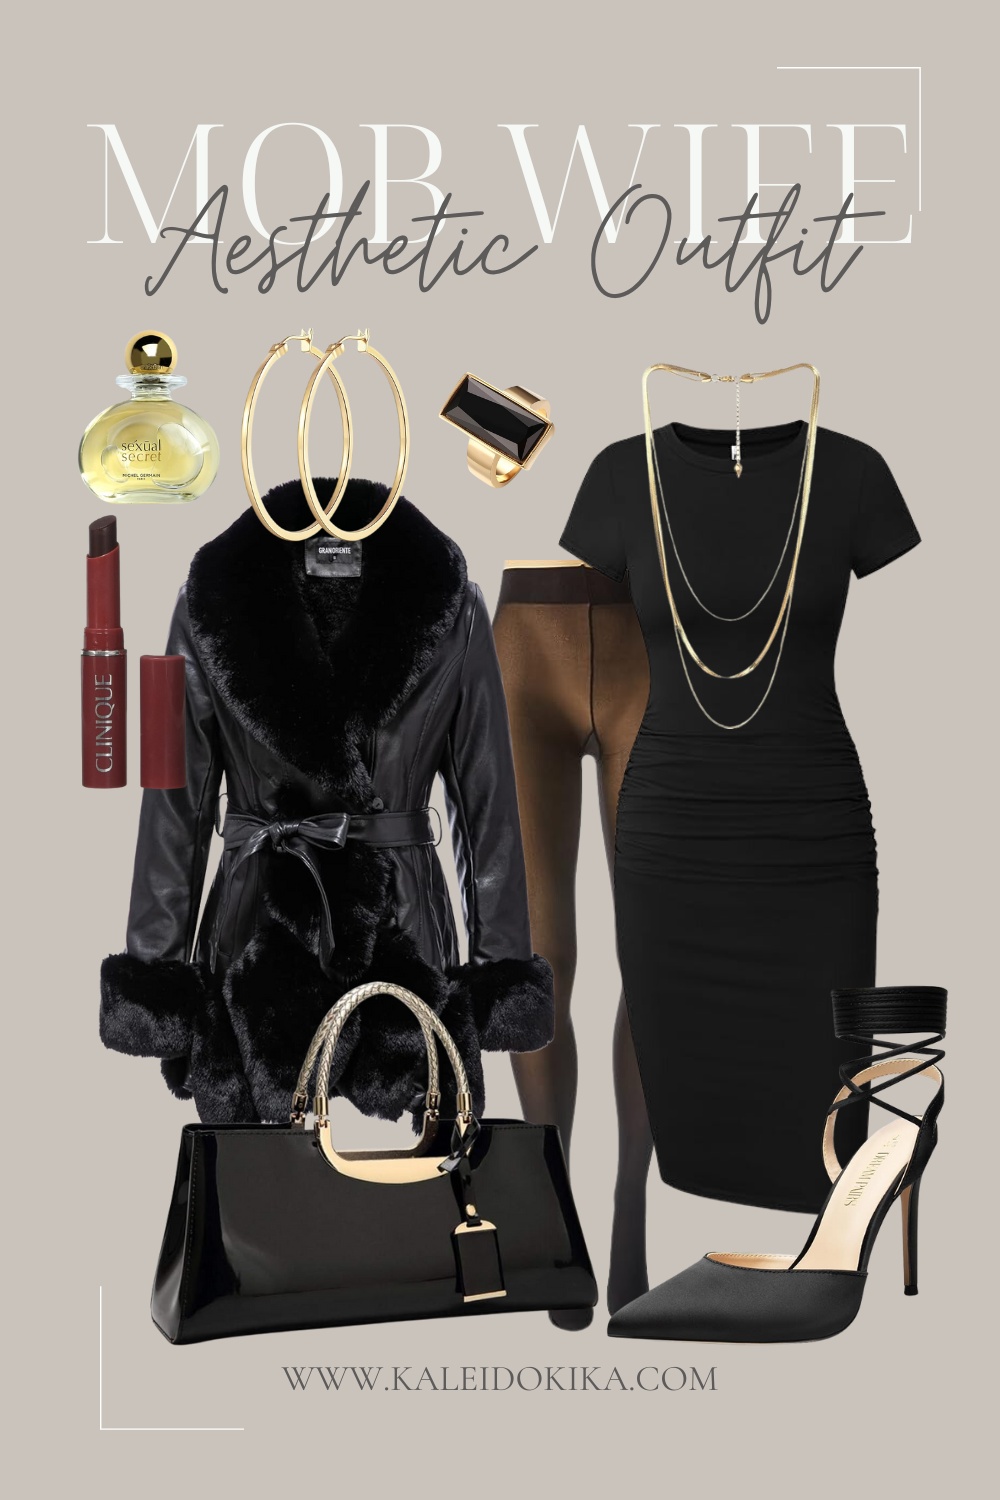 Image showing a sexy and classy mob wife aesthetic outfit idea